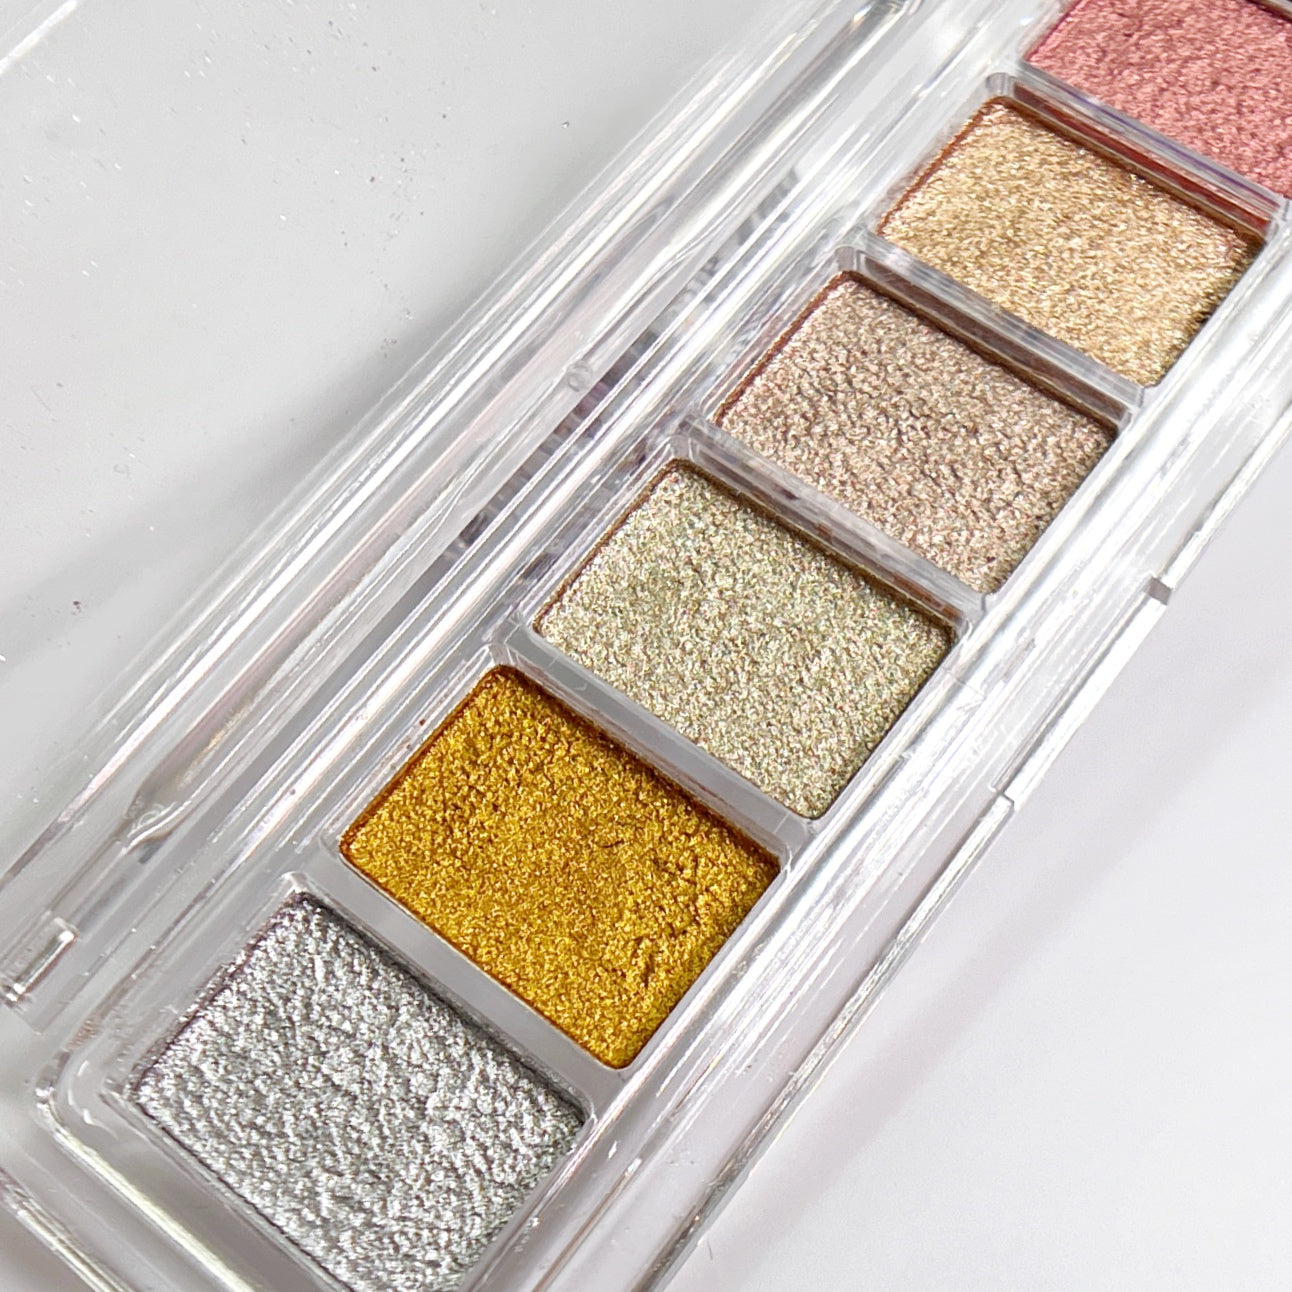 Six color metallic pigment palette in clear container on white background. 